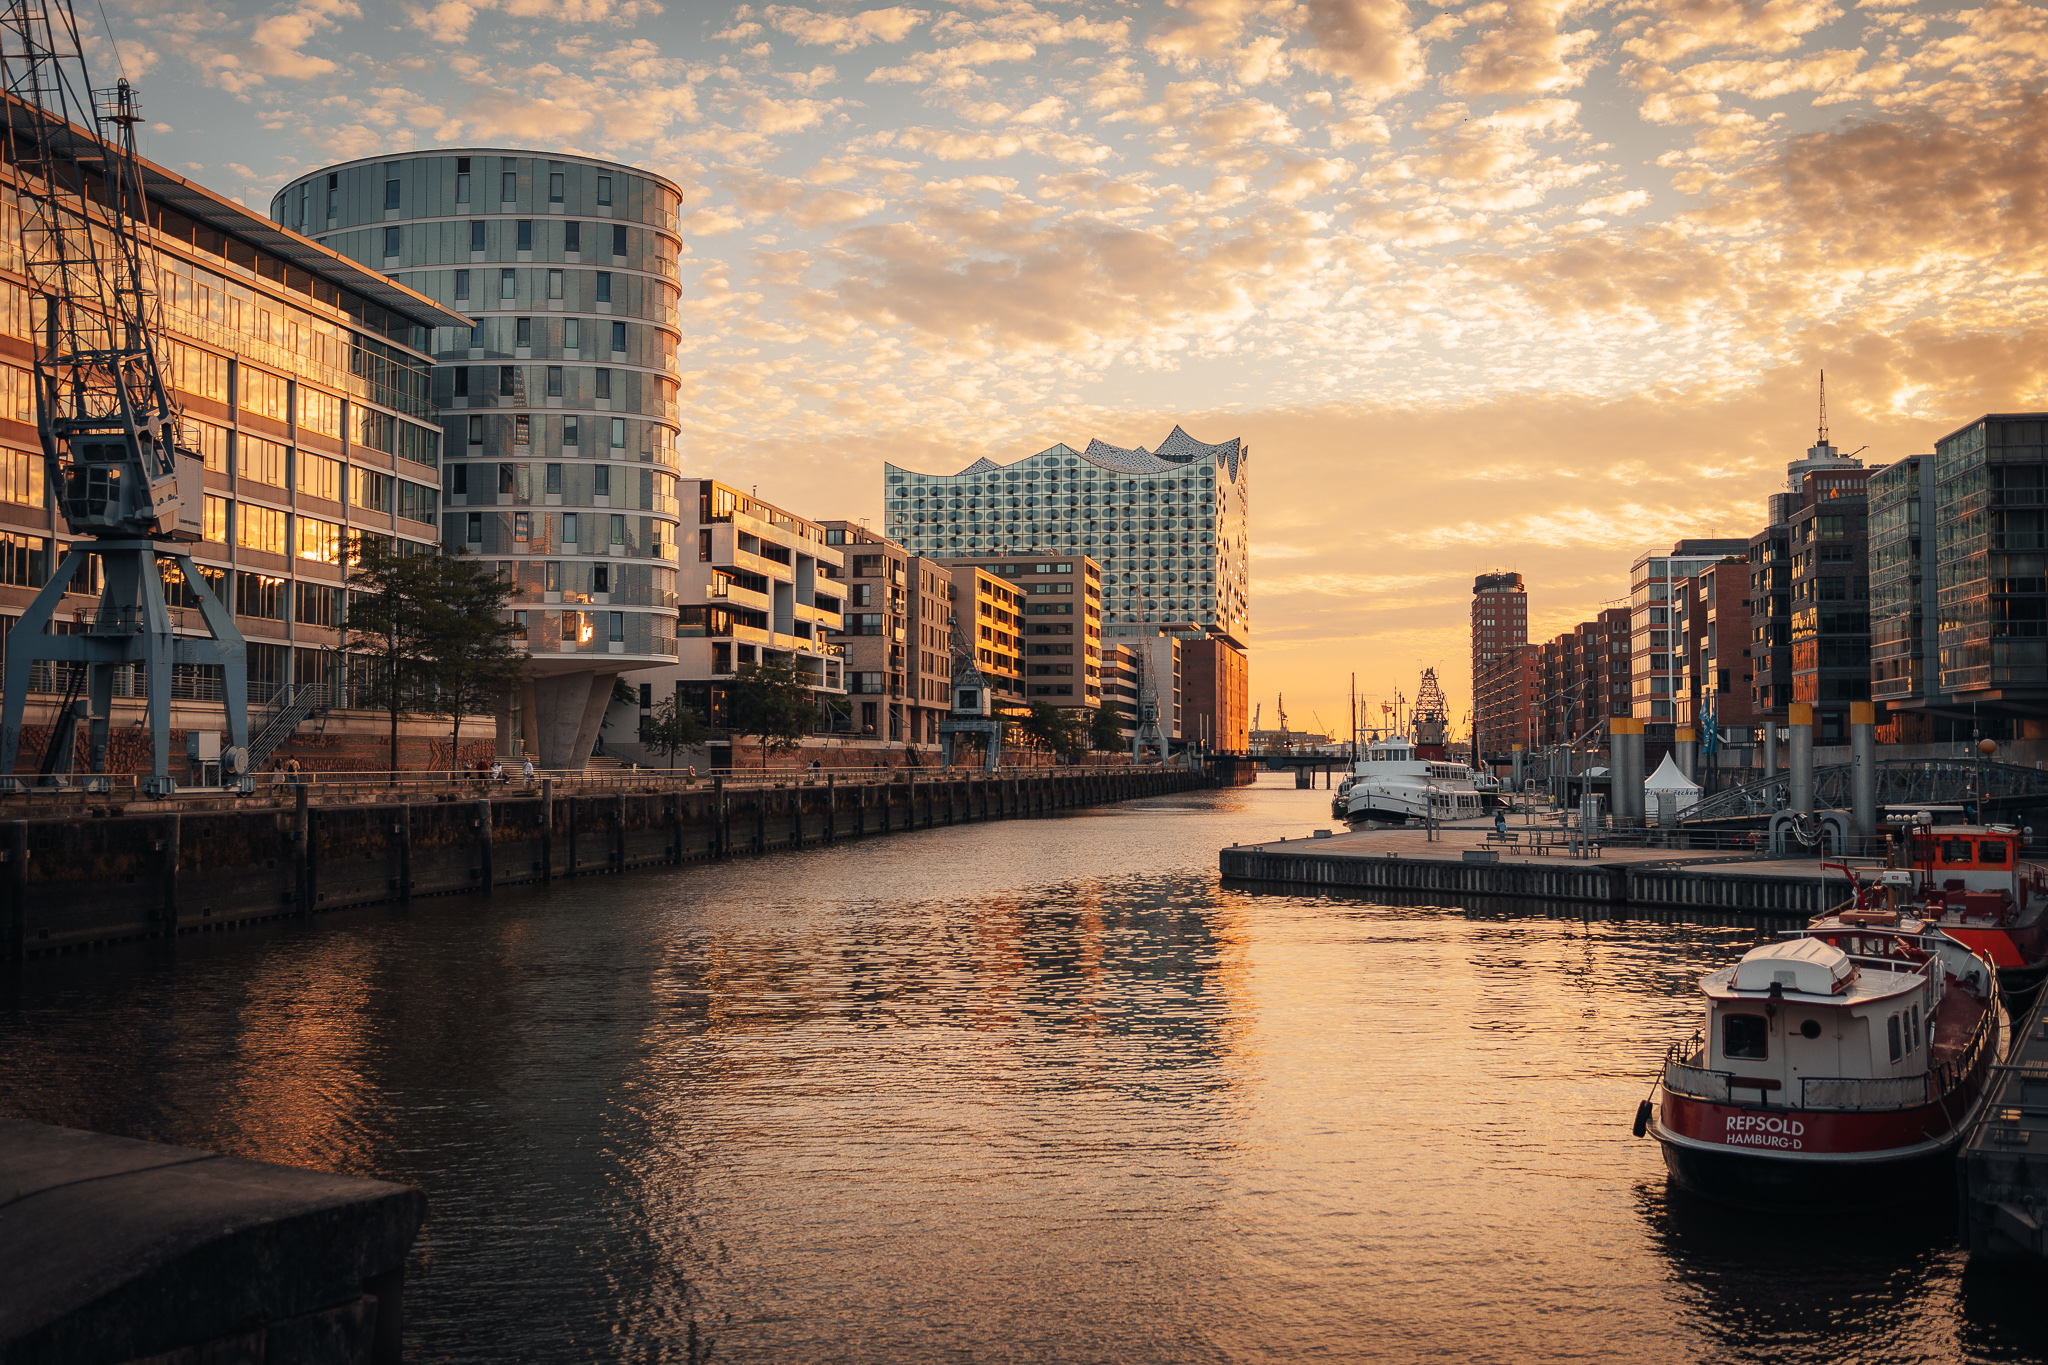 10 exciting facts about Hamburg